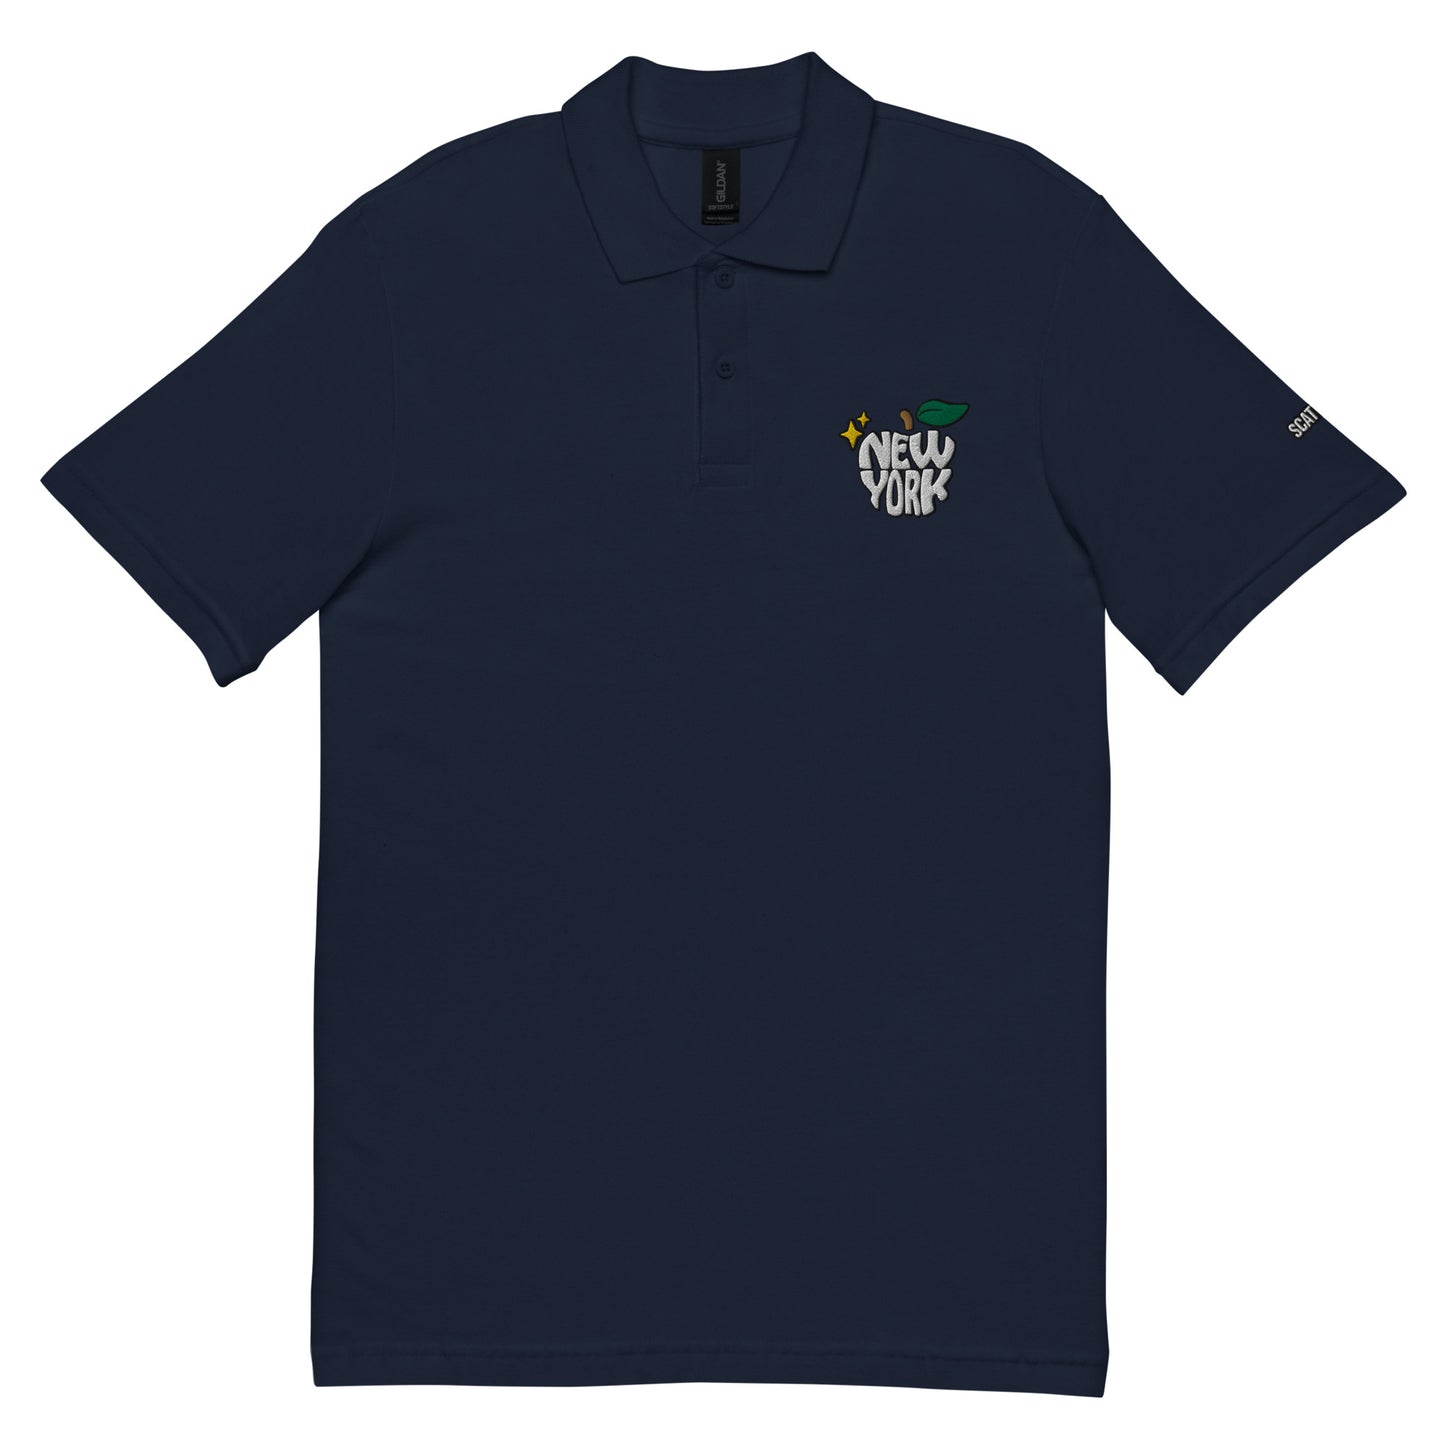 New York Apple Logo Embroidered Navy Blue Polo Shirt Scattered Streetwear